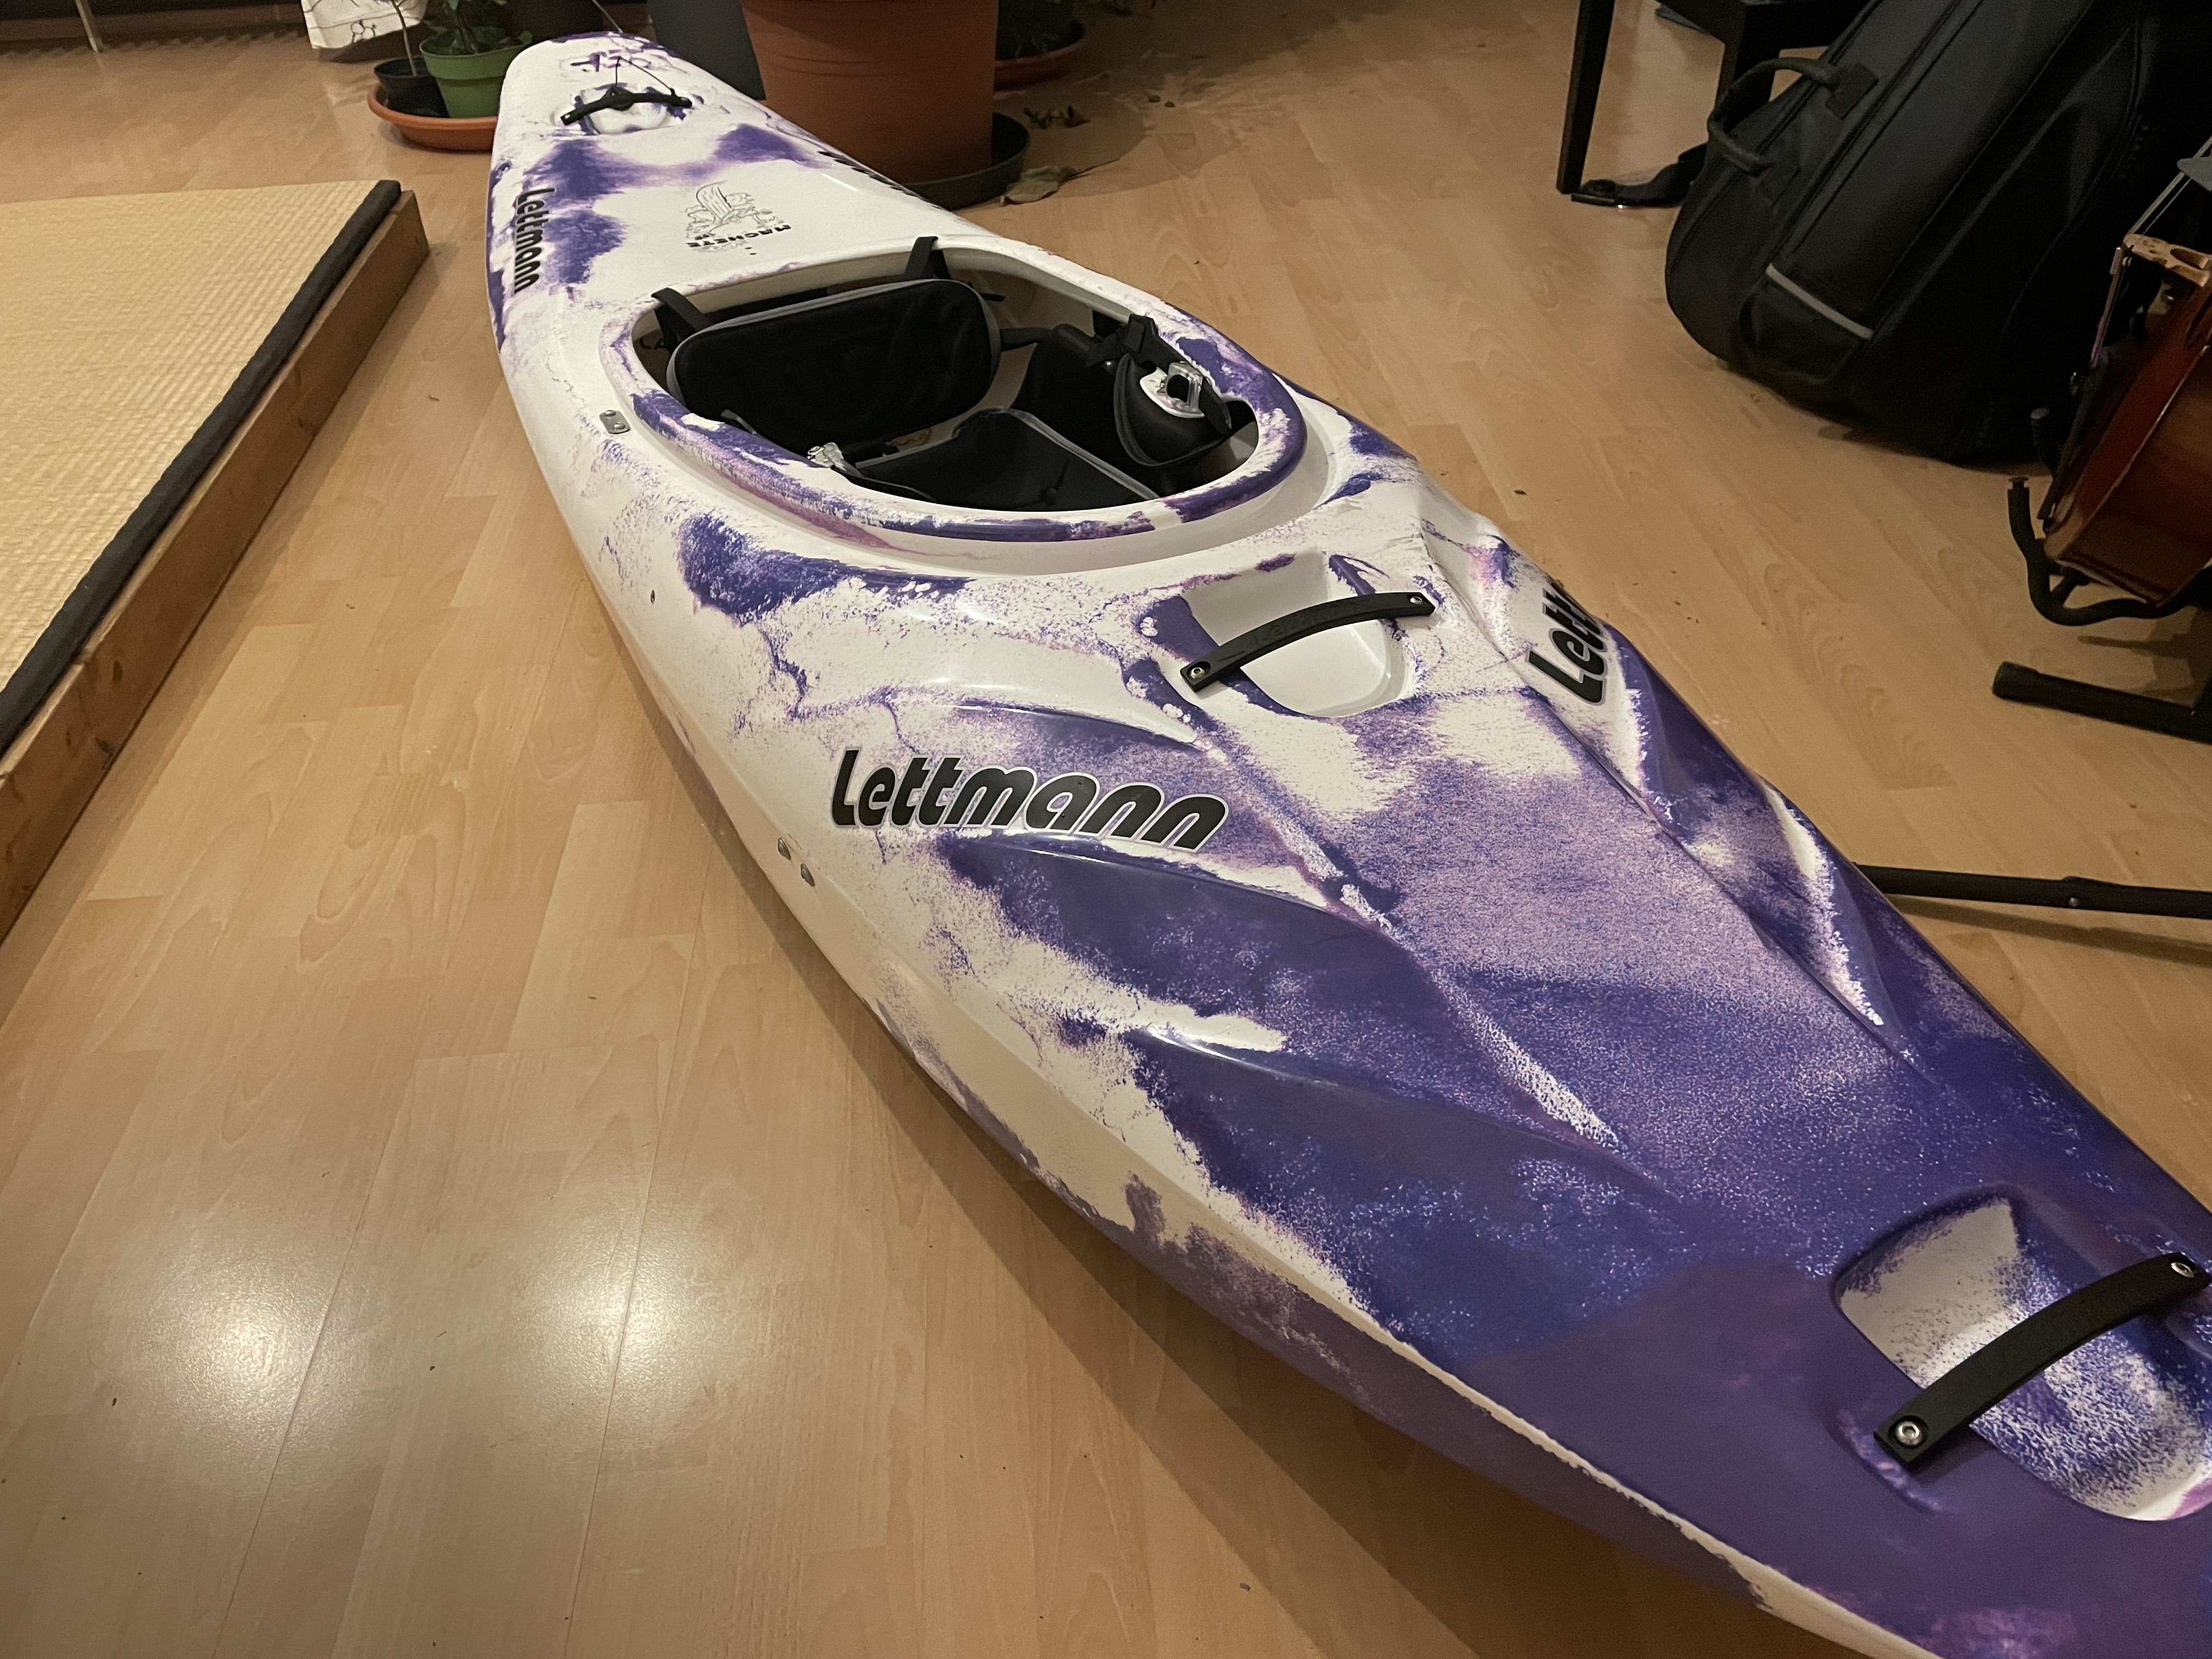 A new whitewater kayak, a Lettmann Machete in purple and white, sitting in our living room